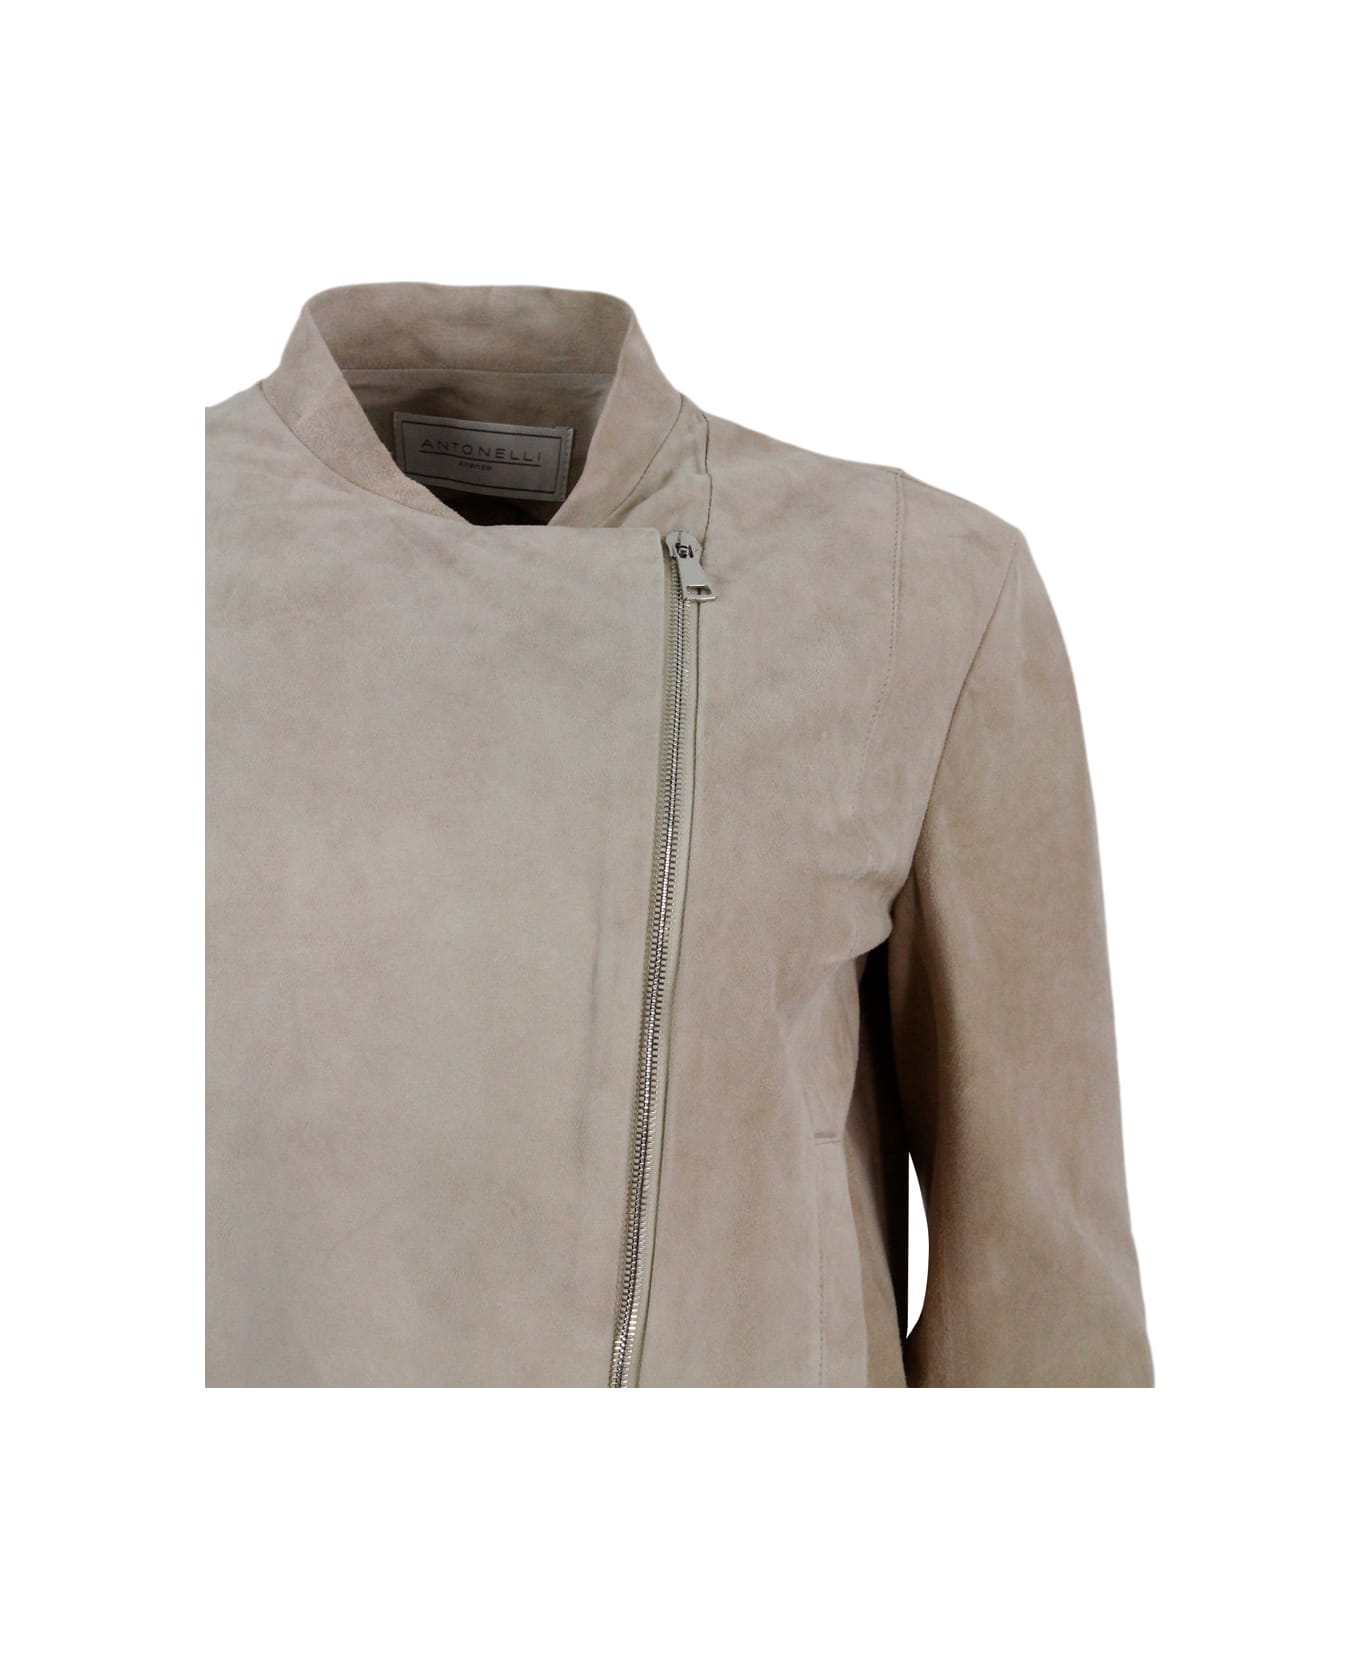 Antonelli Biker Jacket Made Of Soft Suede. Side Zip Closure And Pockets On The Front - Beige レザージャケット